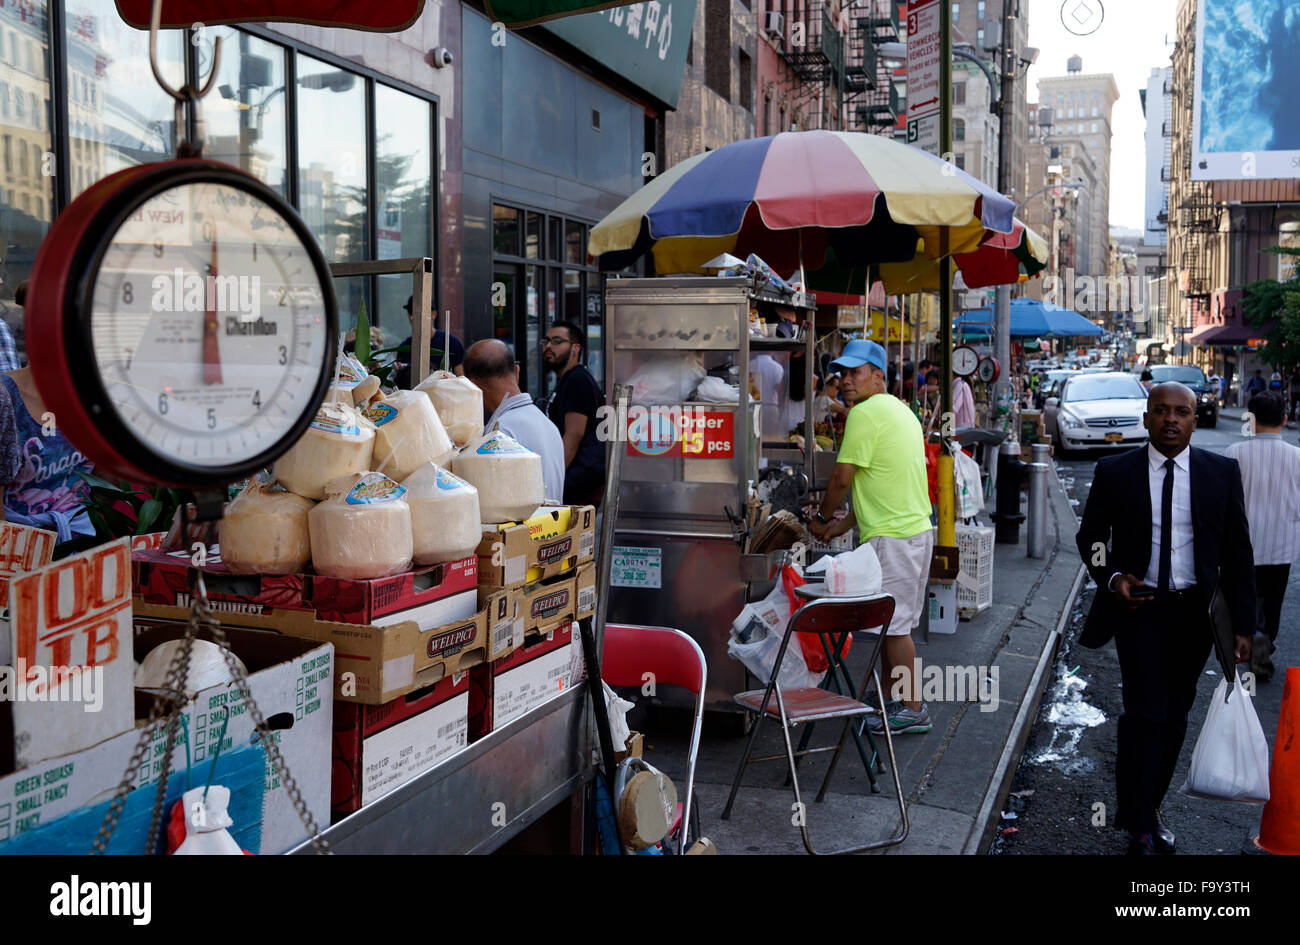 Food and grocery vendors crowd the sidewalk of New York City Chinatown, USA Stock Photo